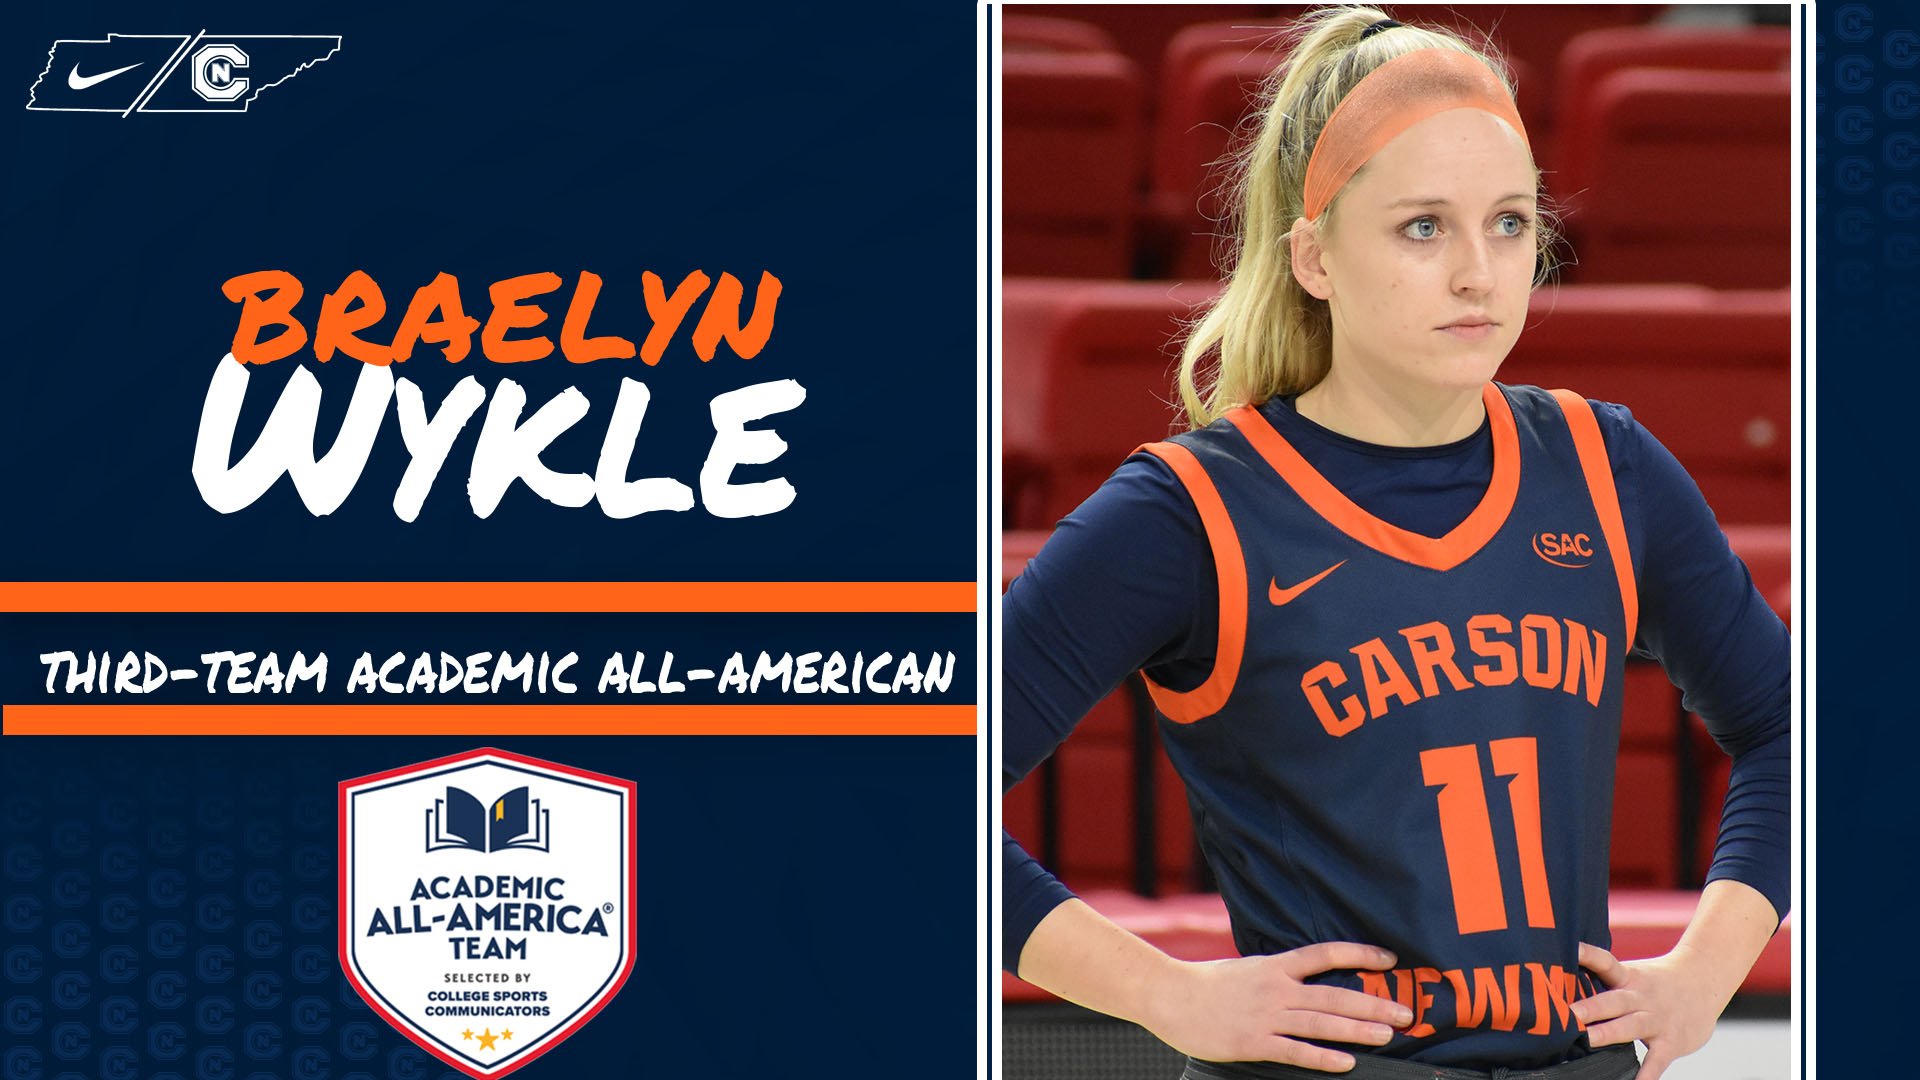 Wykle becomes two-time CSC Academic All-American